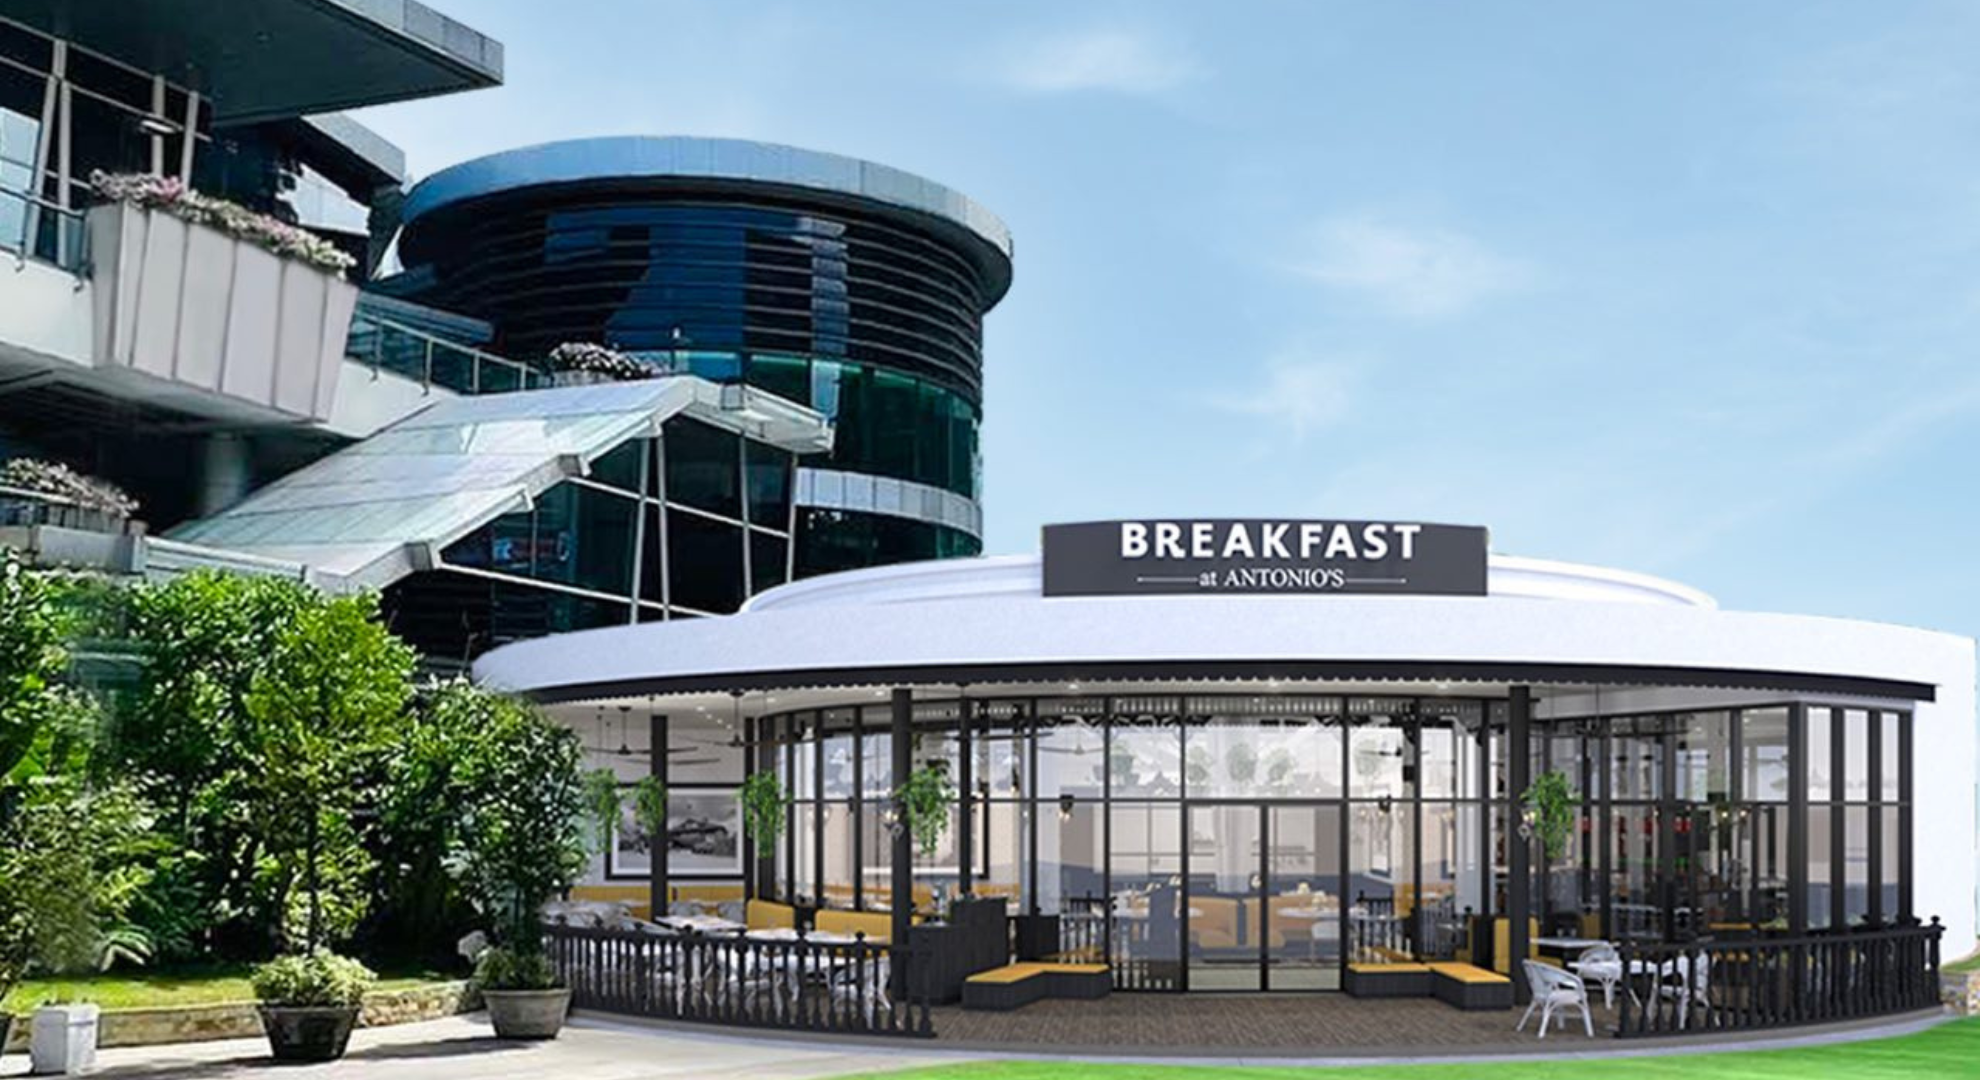 First in Manila: Robinsons Magnolia welcomes Breakfast at Antonio’s